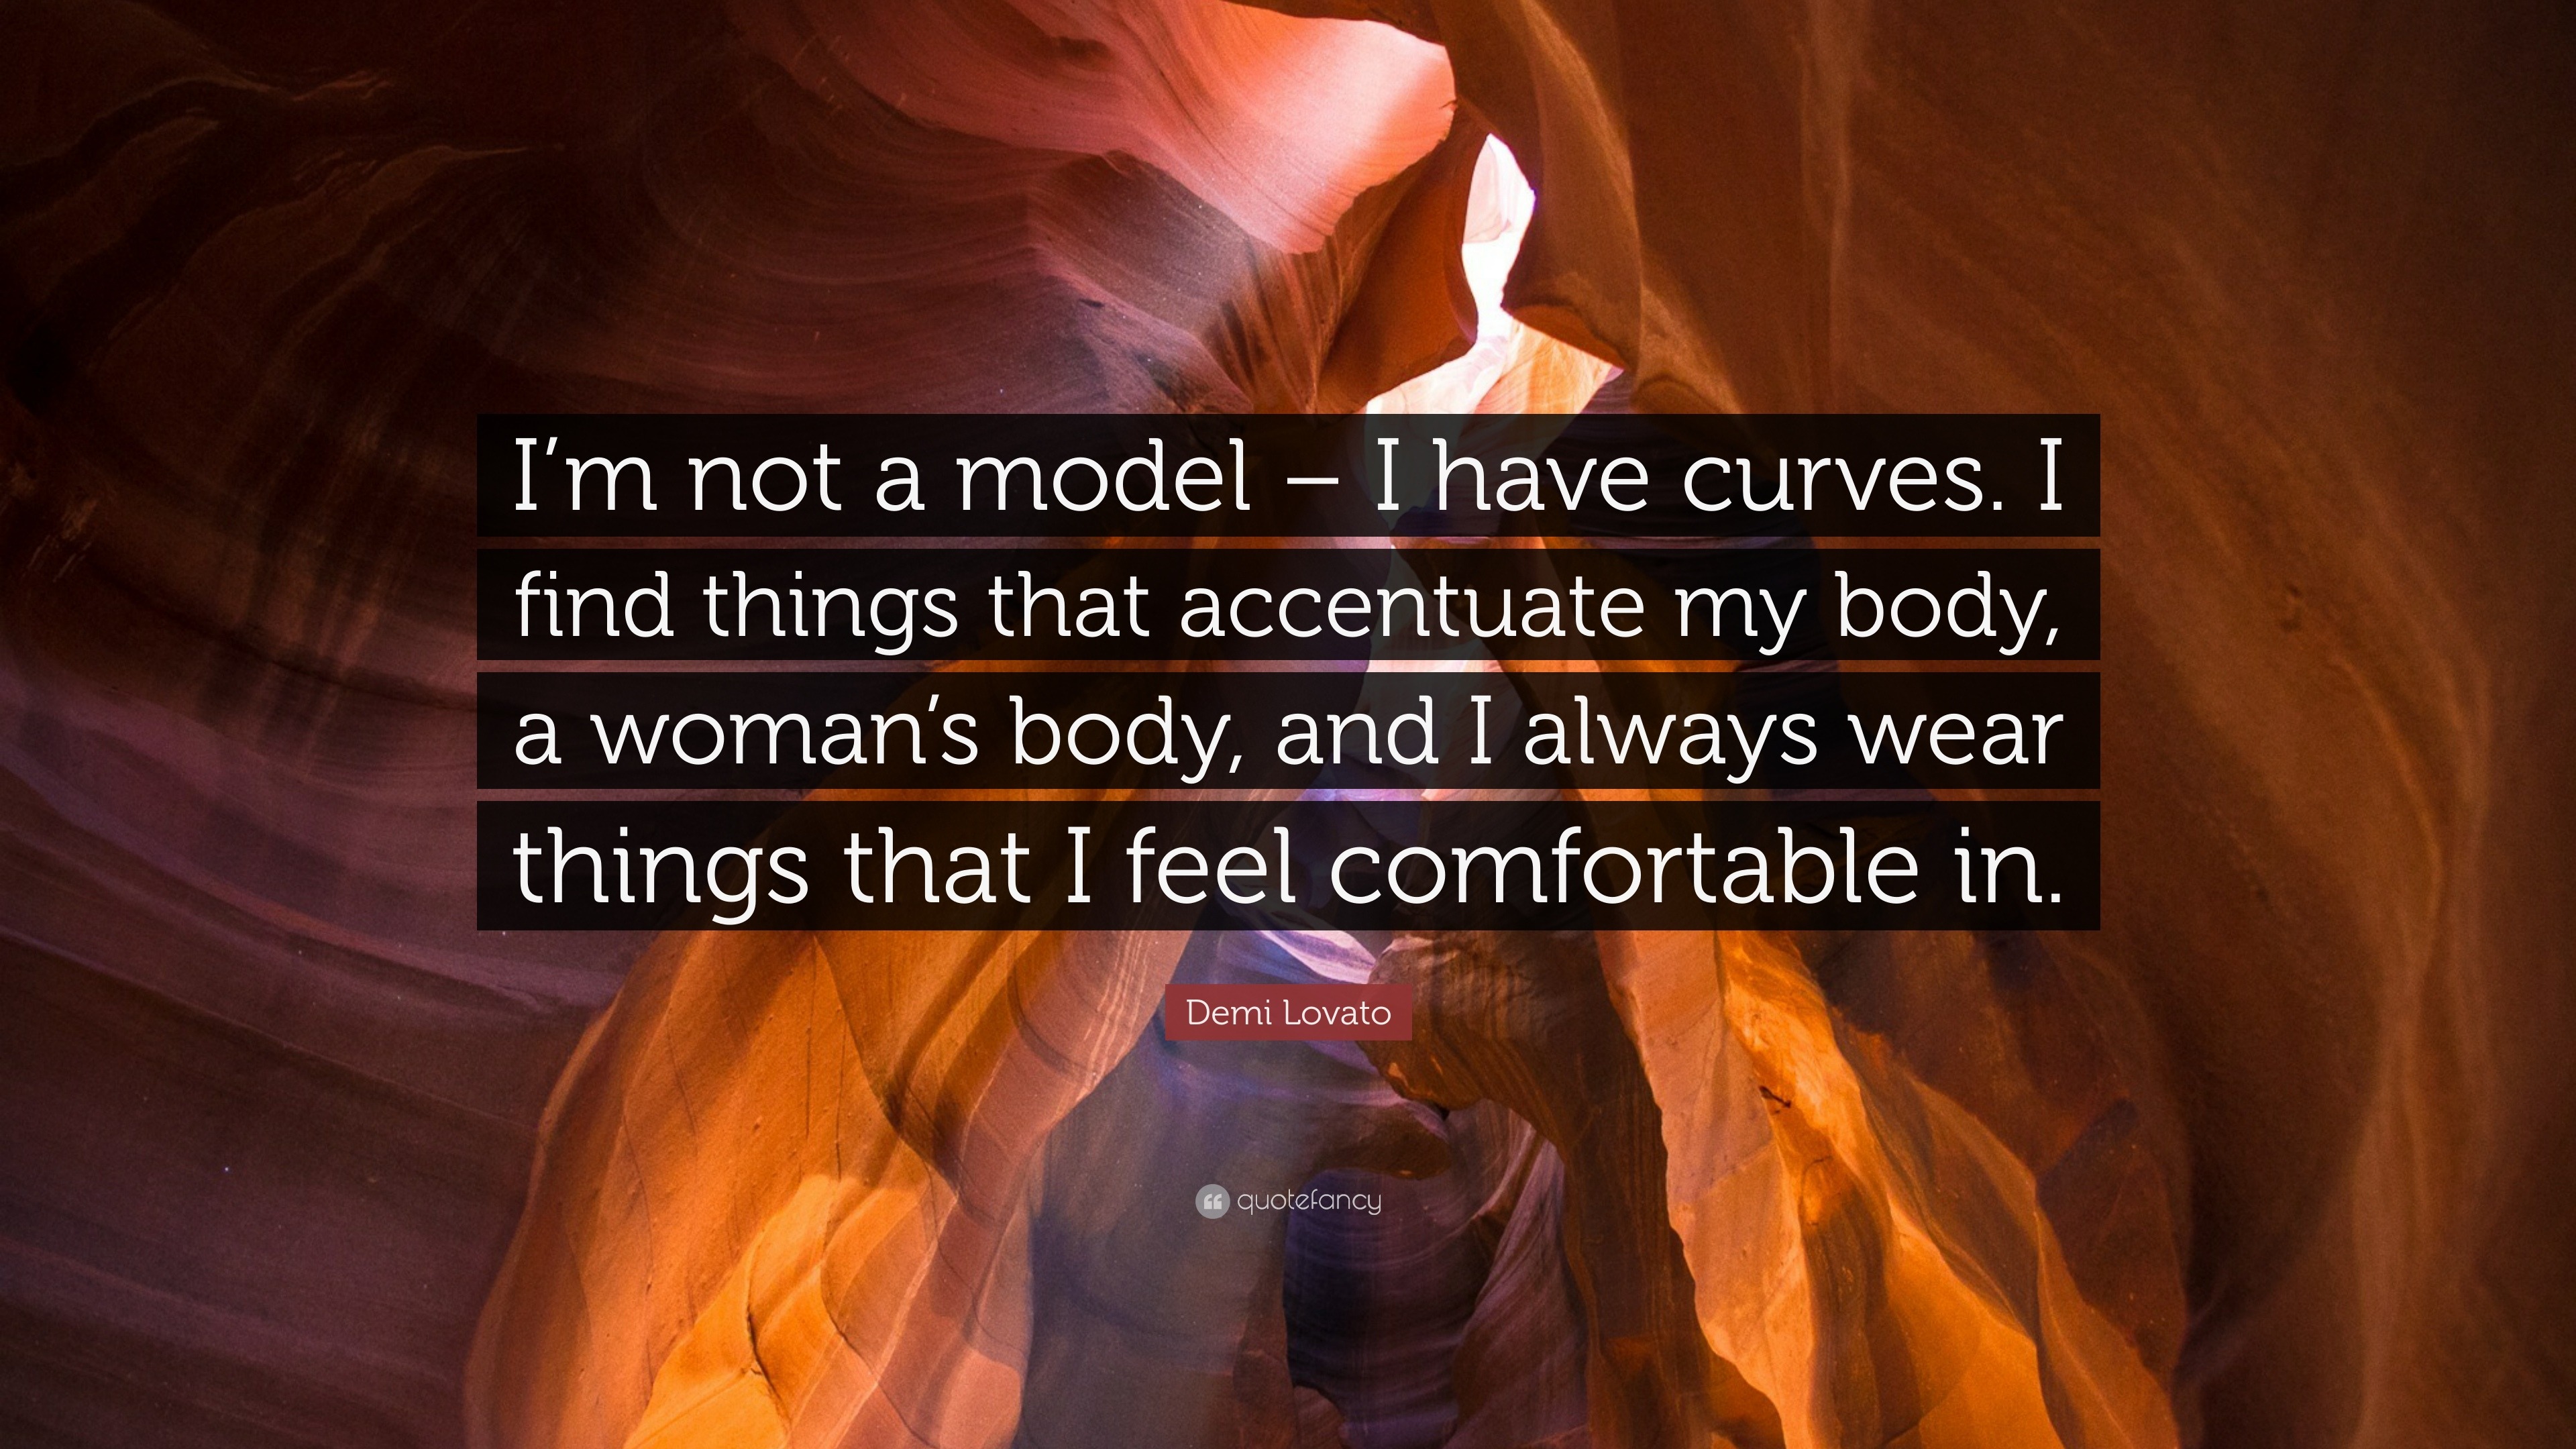 Every Woman's Body is REAL Curvy or Not